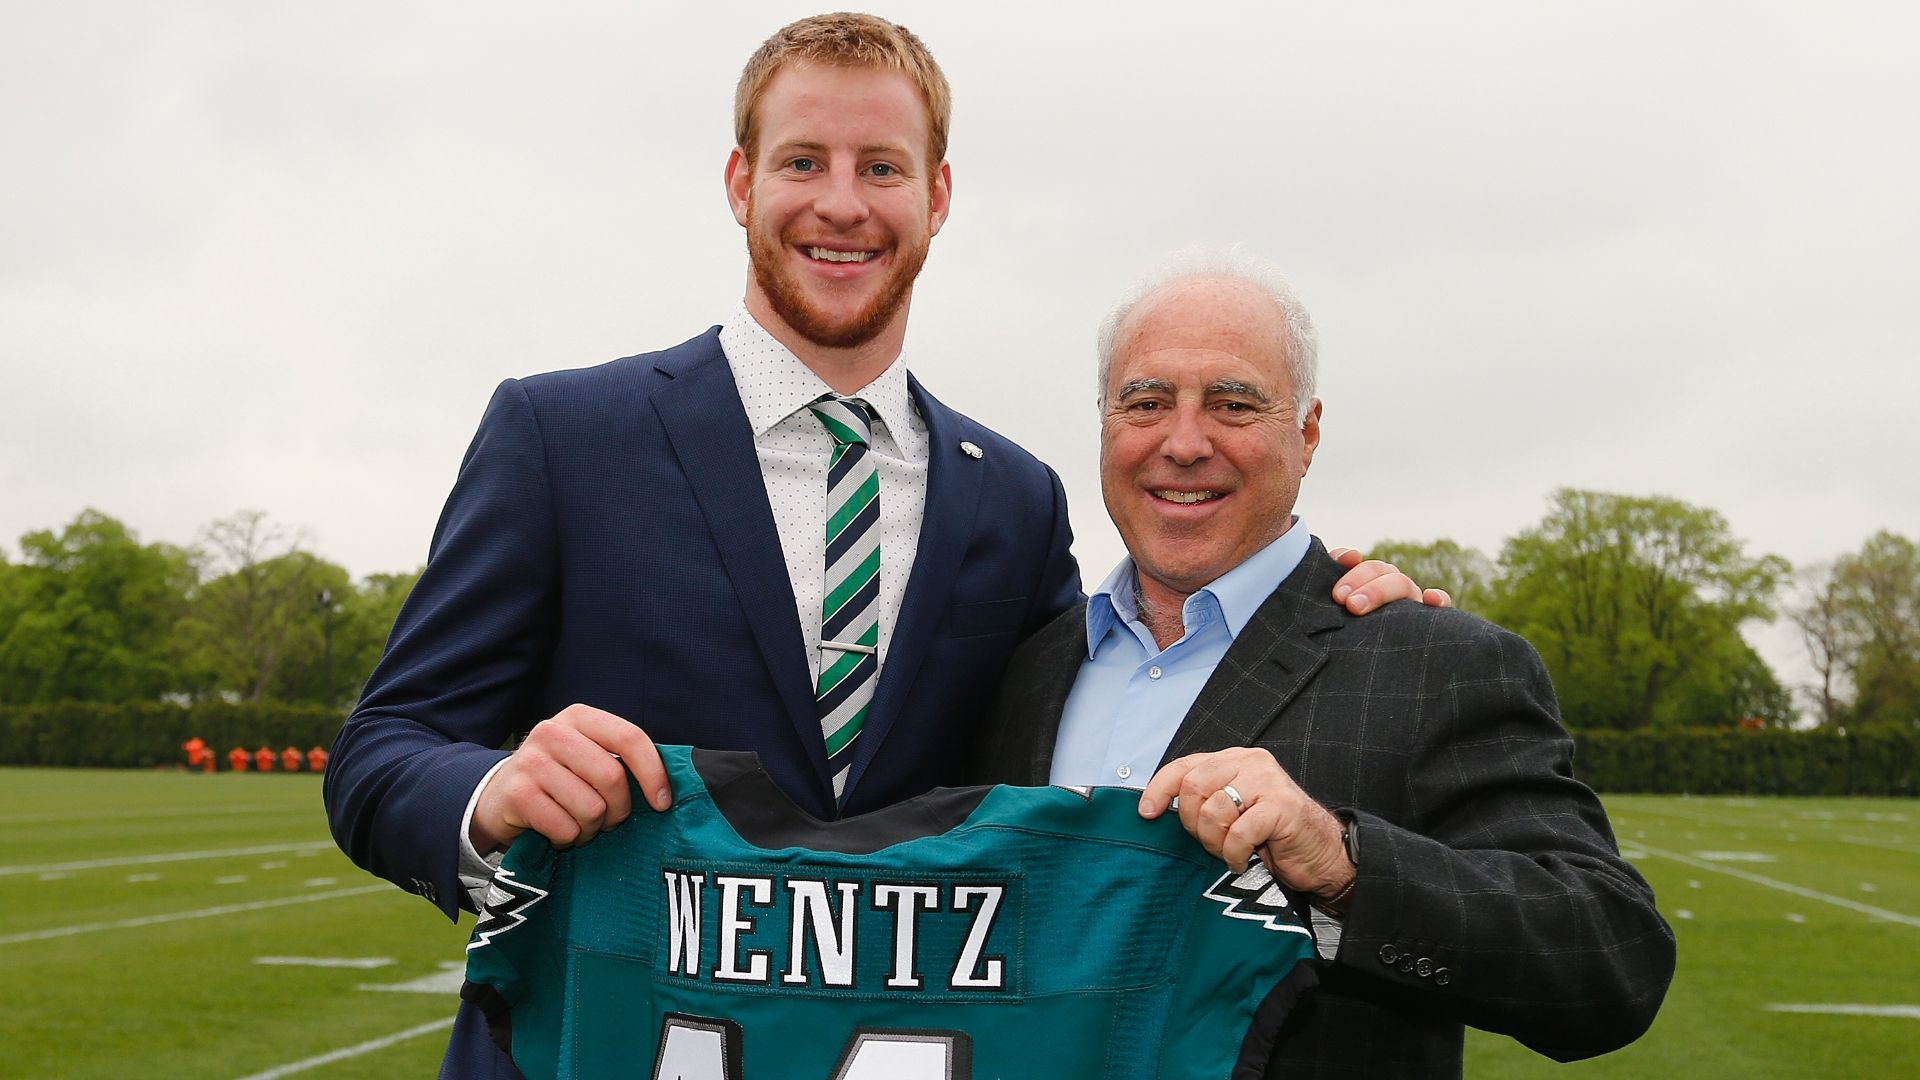 QB Carson Wentz, the No. 2 overall draft pick, agrees to deal with